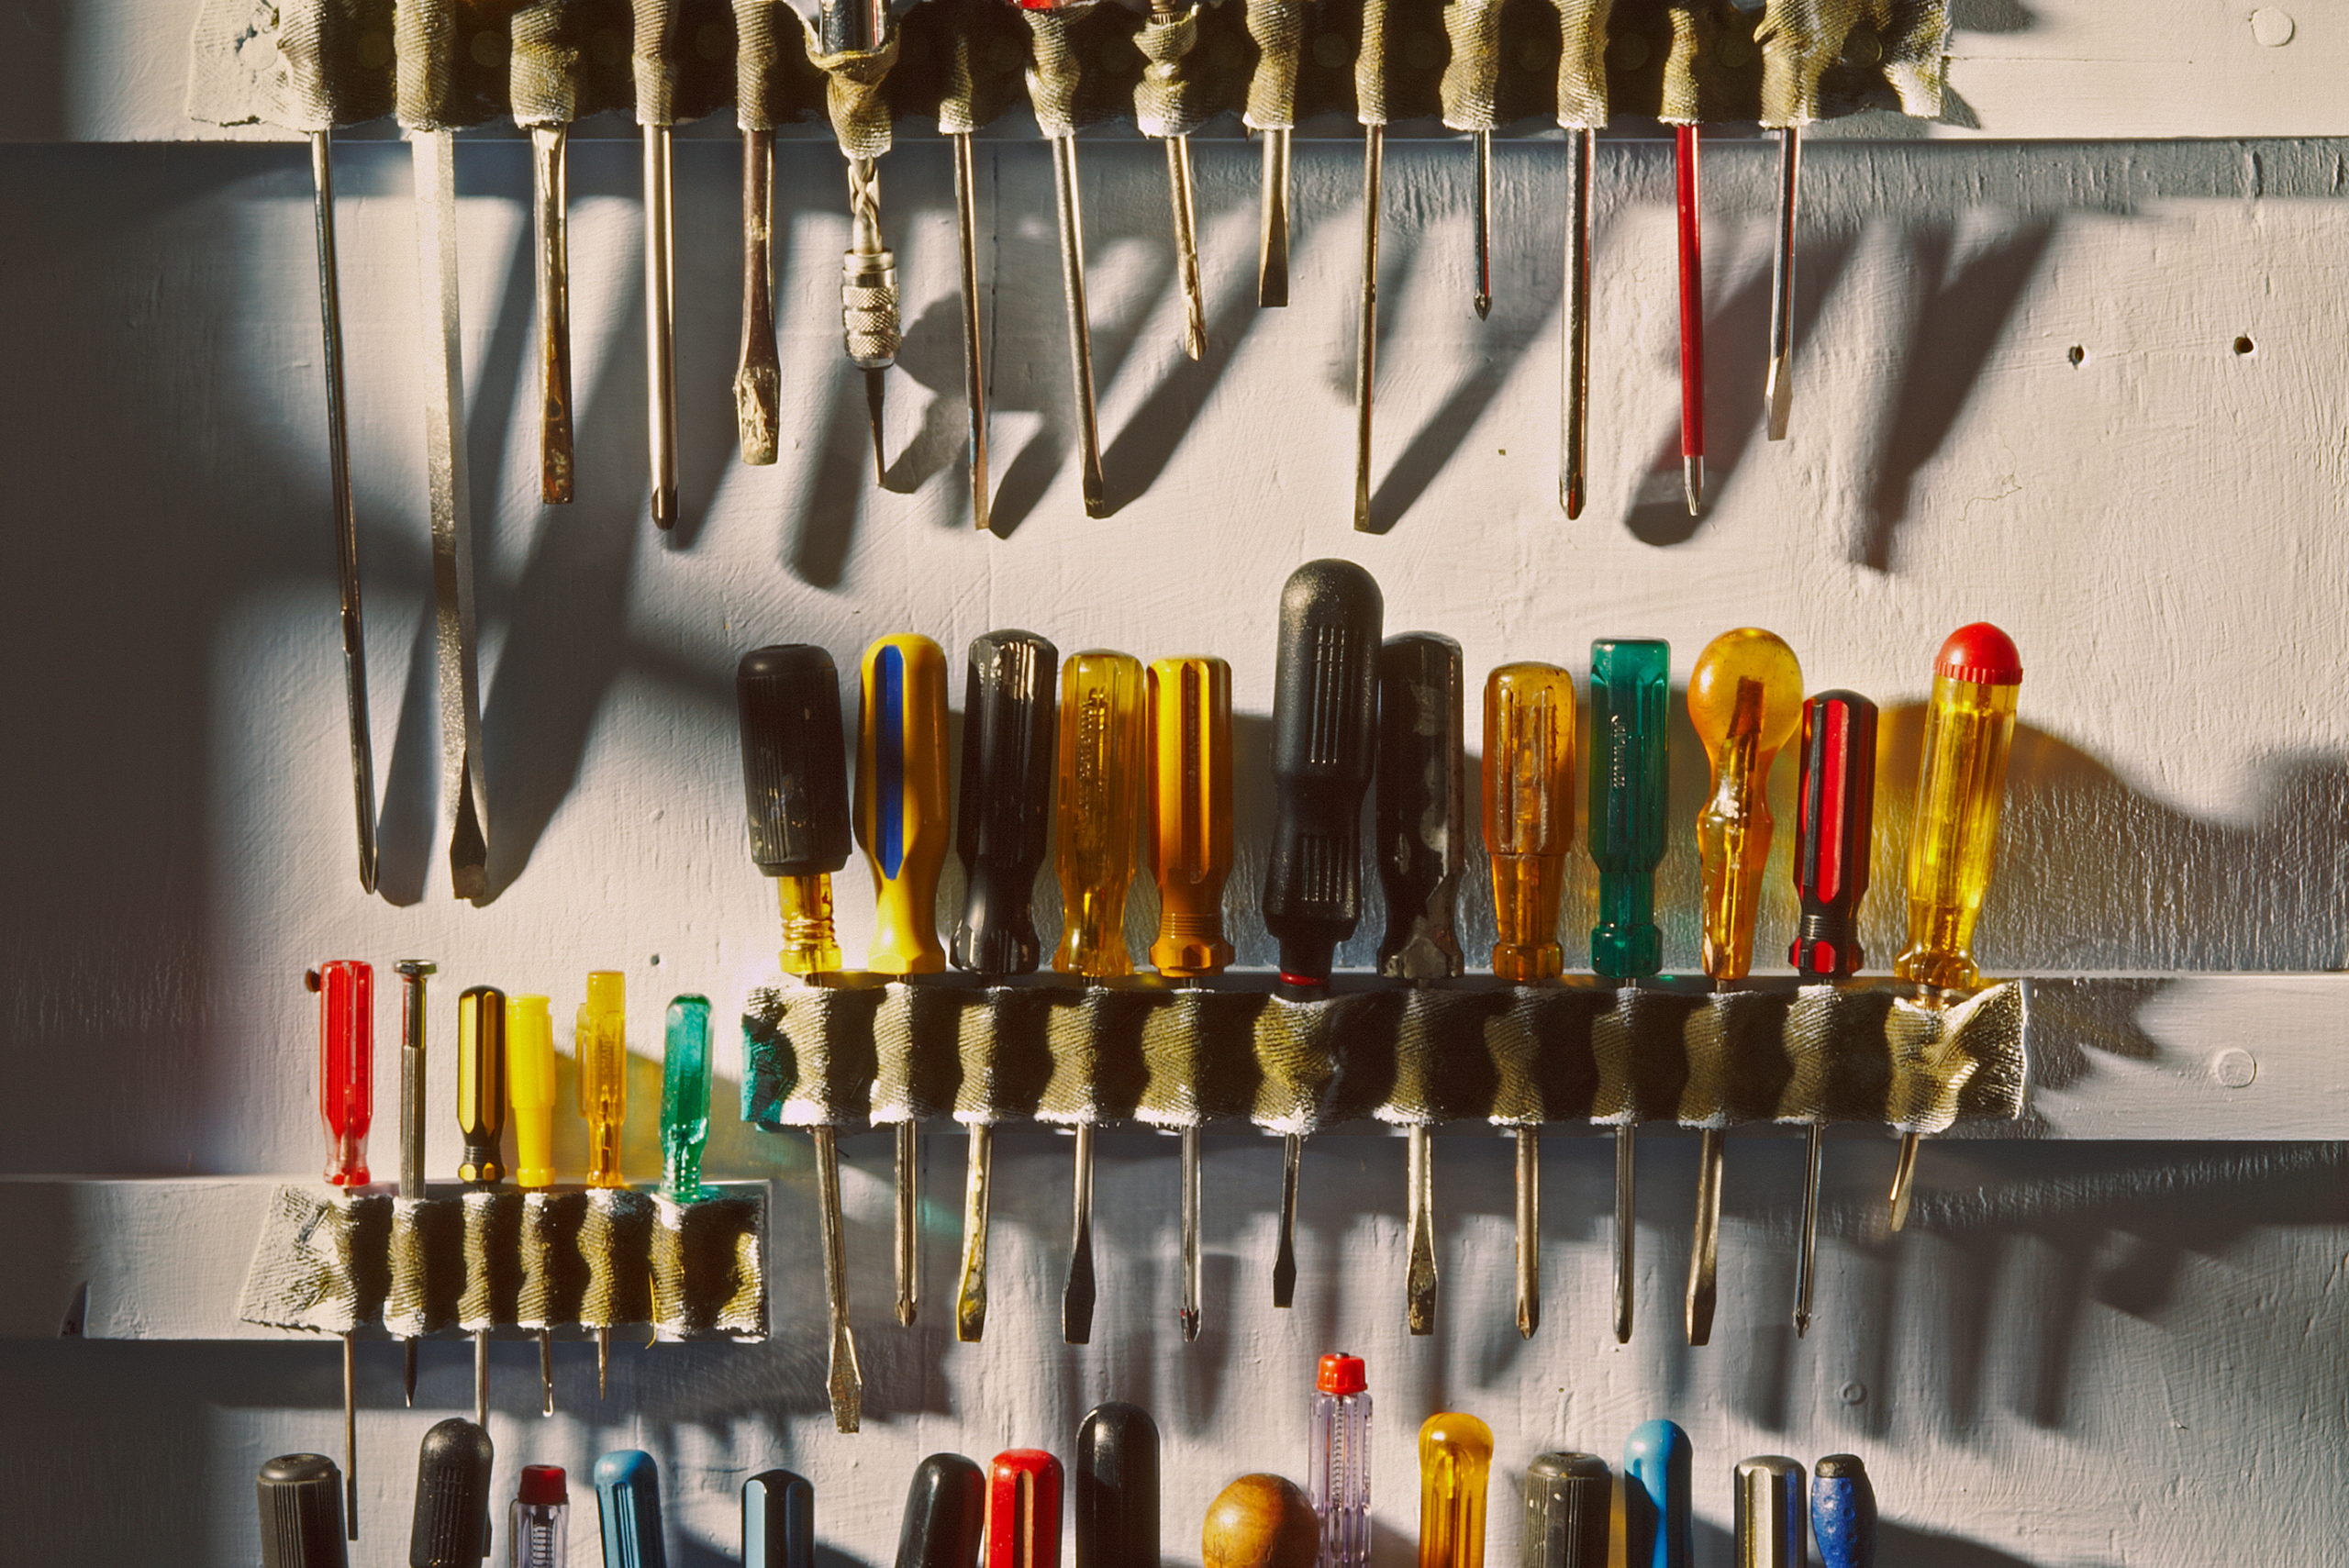 An assortment of screwdrivers mounted onto a wall.